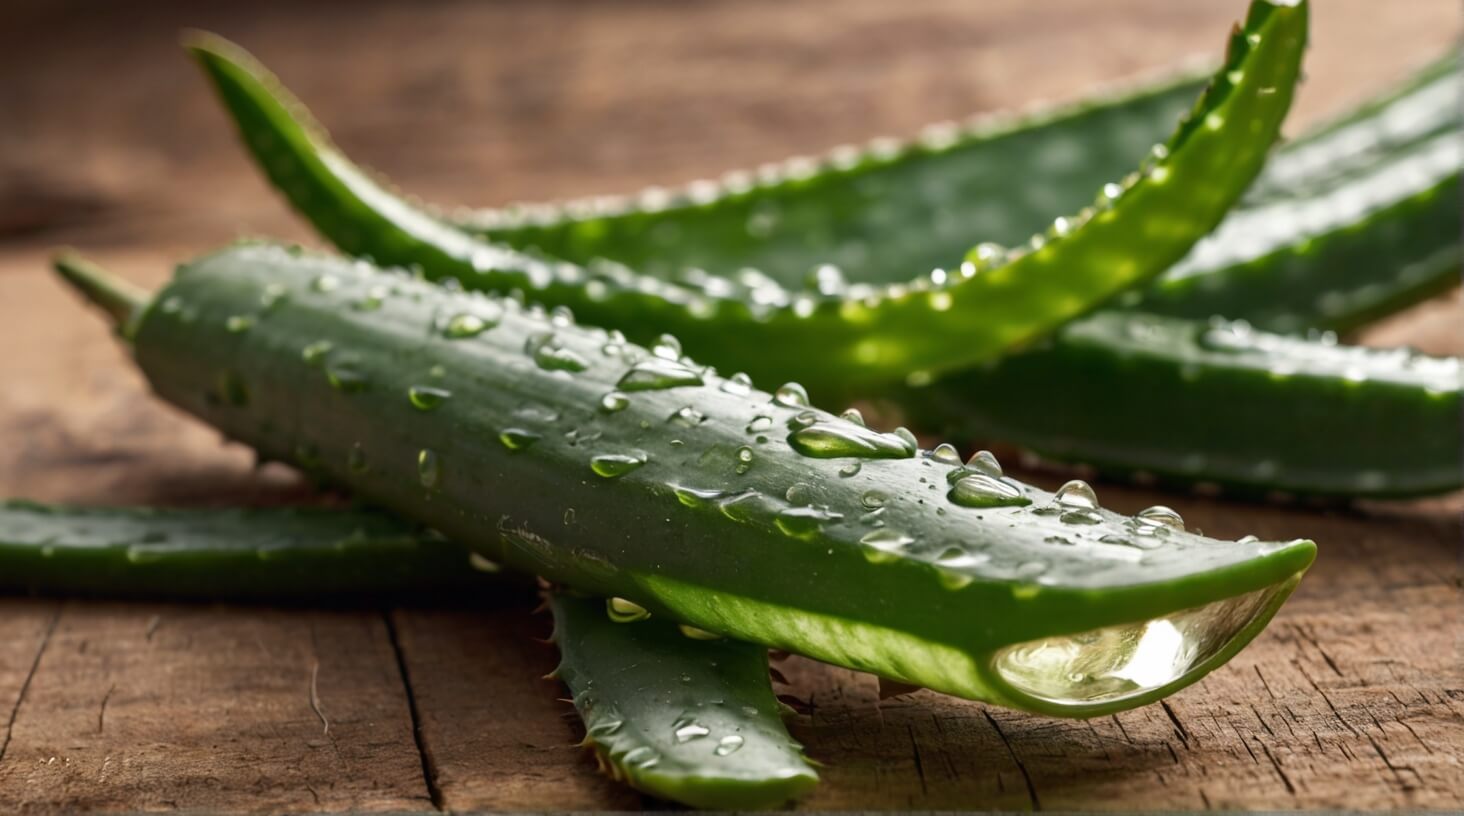 Close-up image of a vibrant green Aloe Vera plant with thick, fleshy leaves, commonly used in skincare and medicinal products.